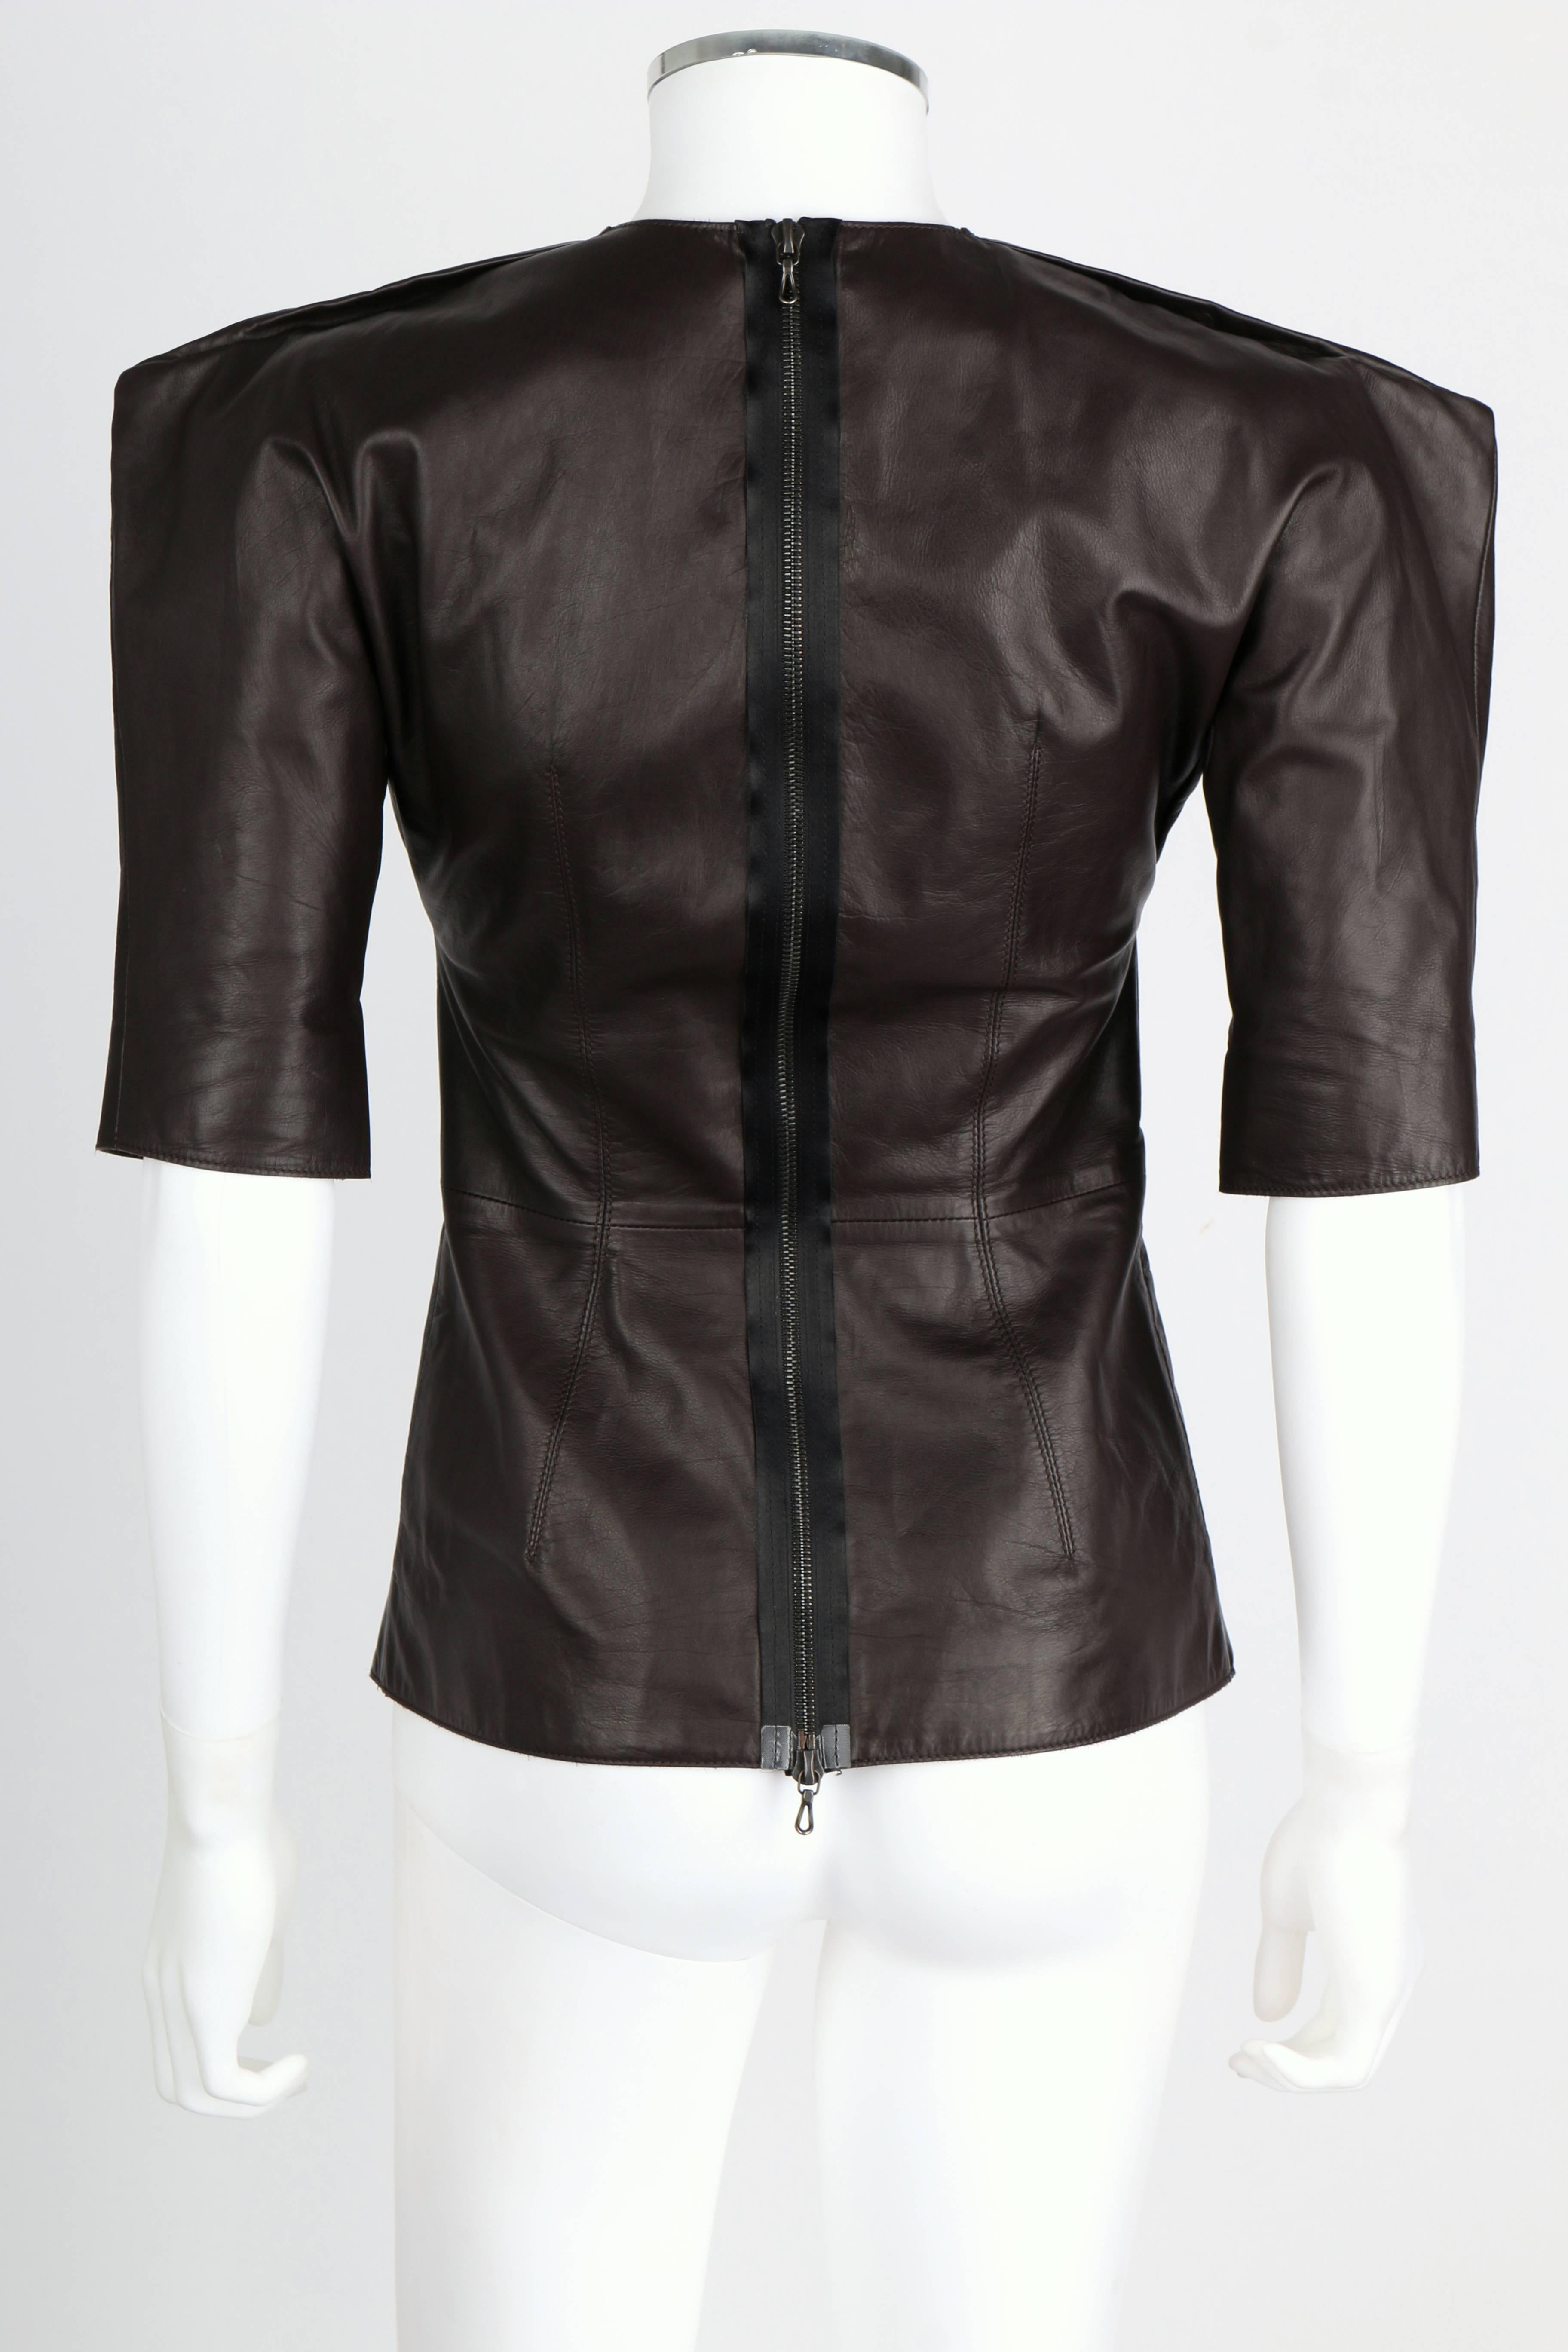 Black LANVIN F/W 2010 Runway Collection Dark Brown Calf Leather Shirt Structured Top